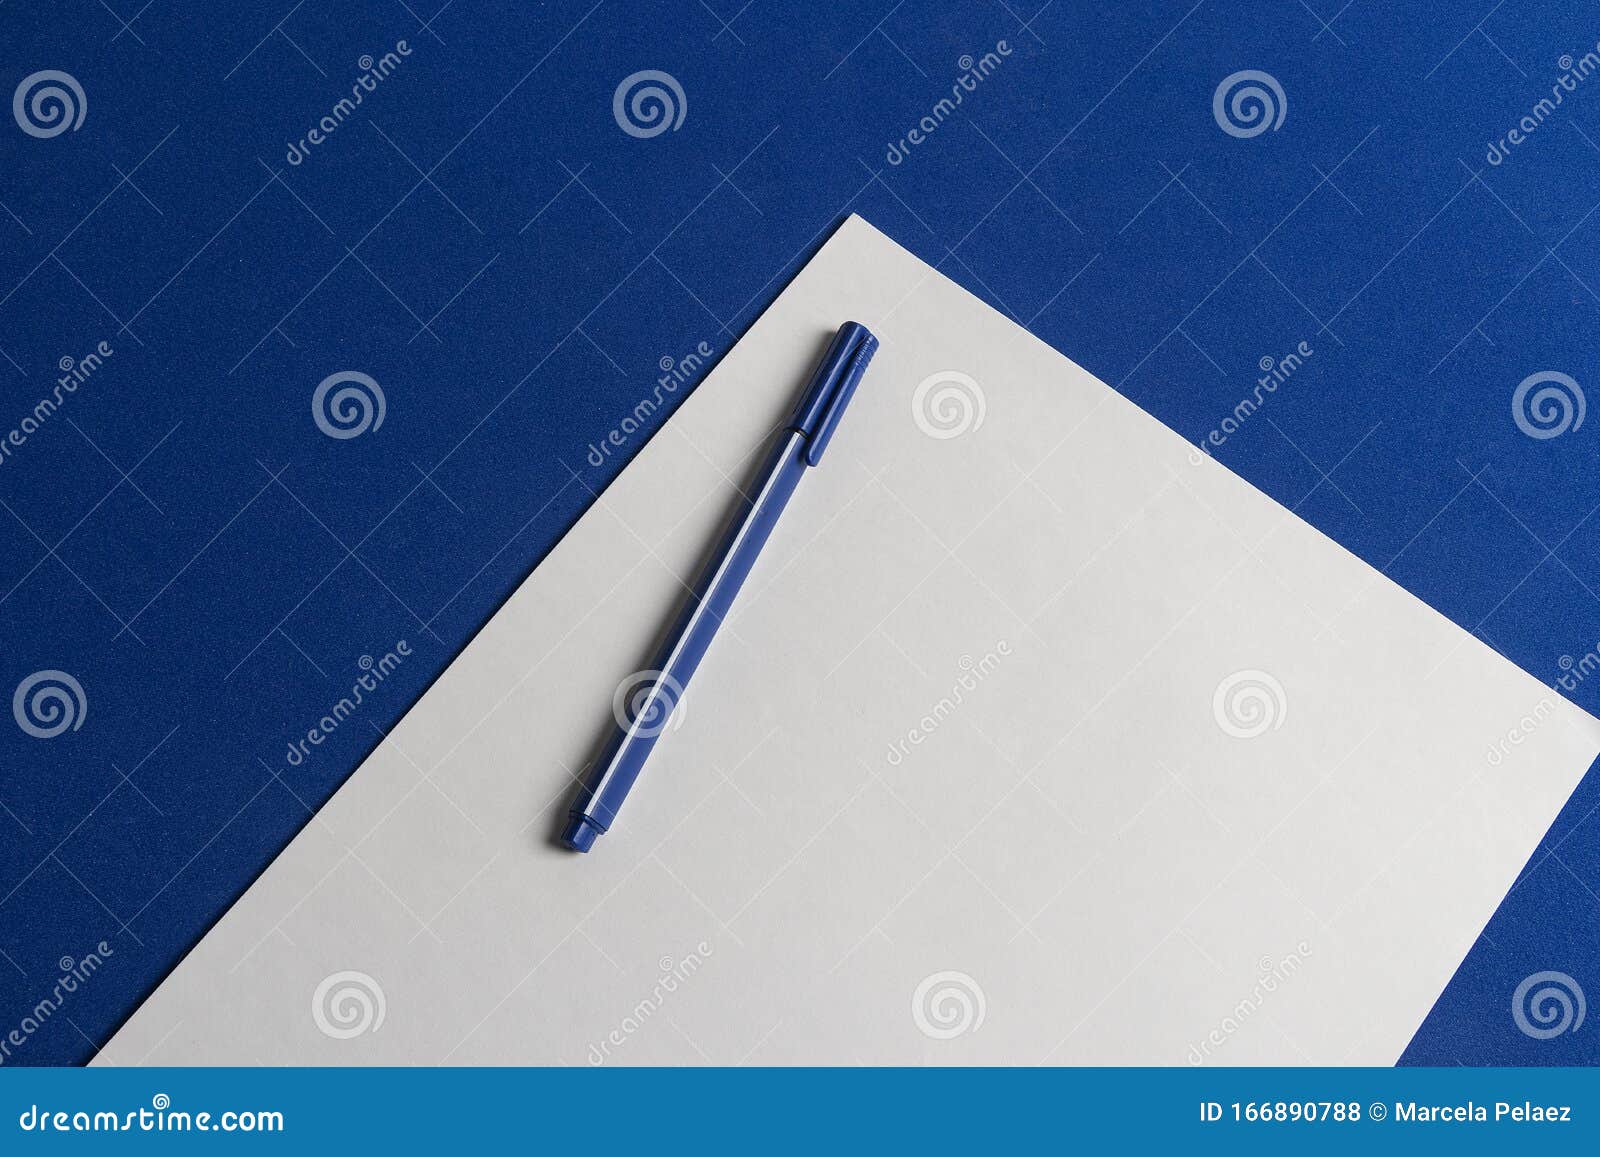 classic blue table with blank sheet of paper and blue pen ready for 2020 goals